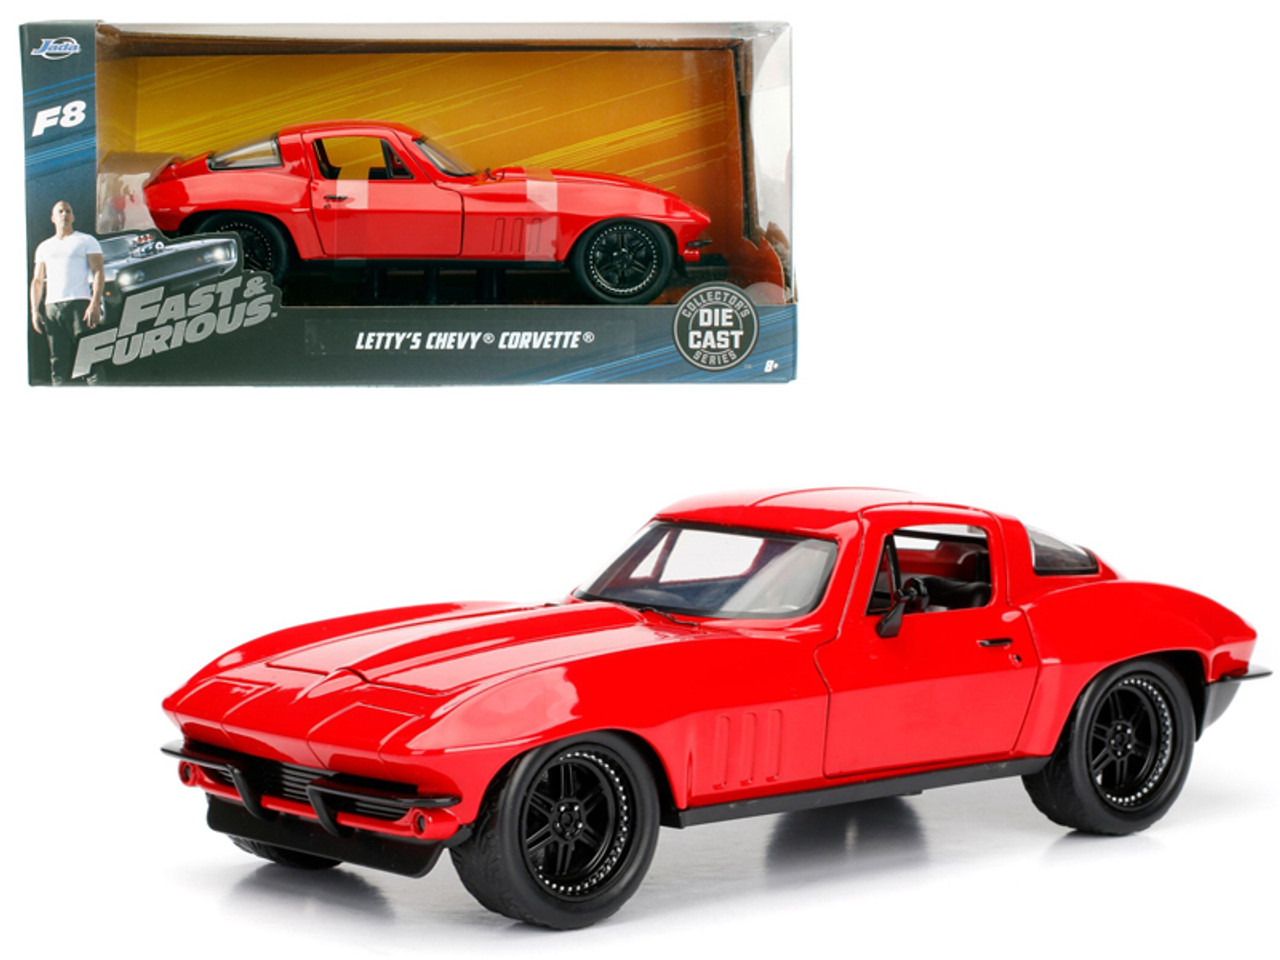 Jada-Toys 1/24 Fast & Furious Letty's Plymouth Barracuda (no